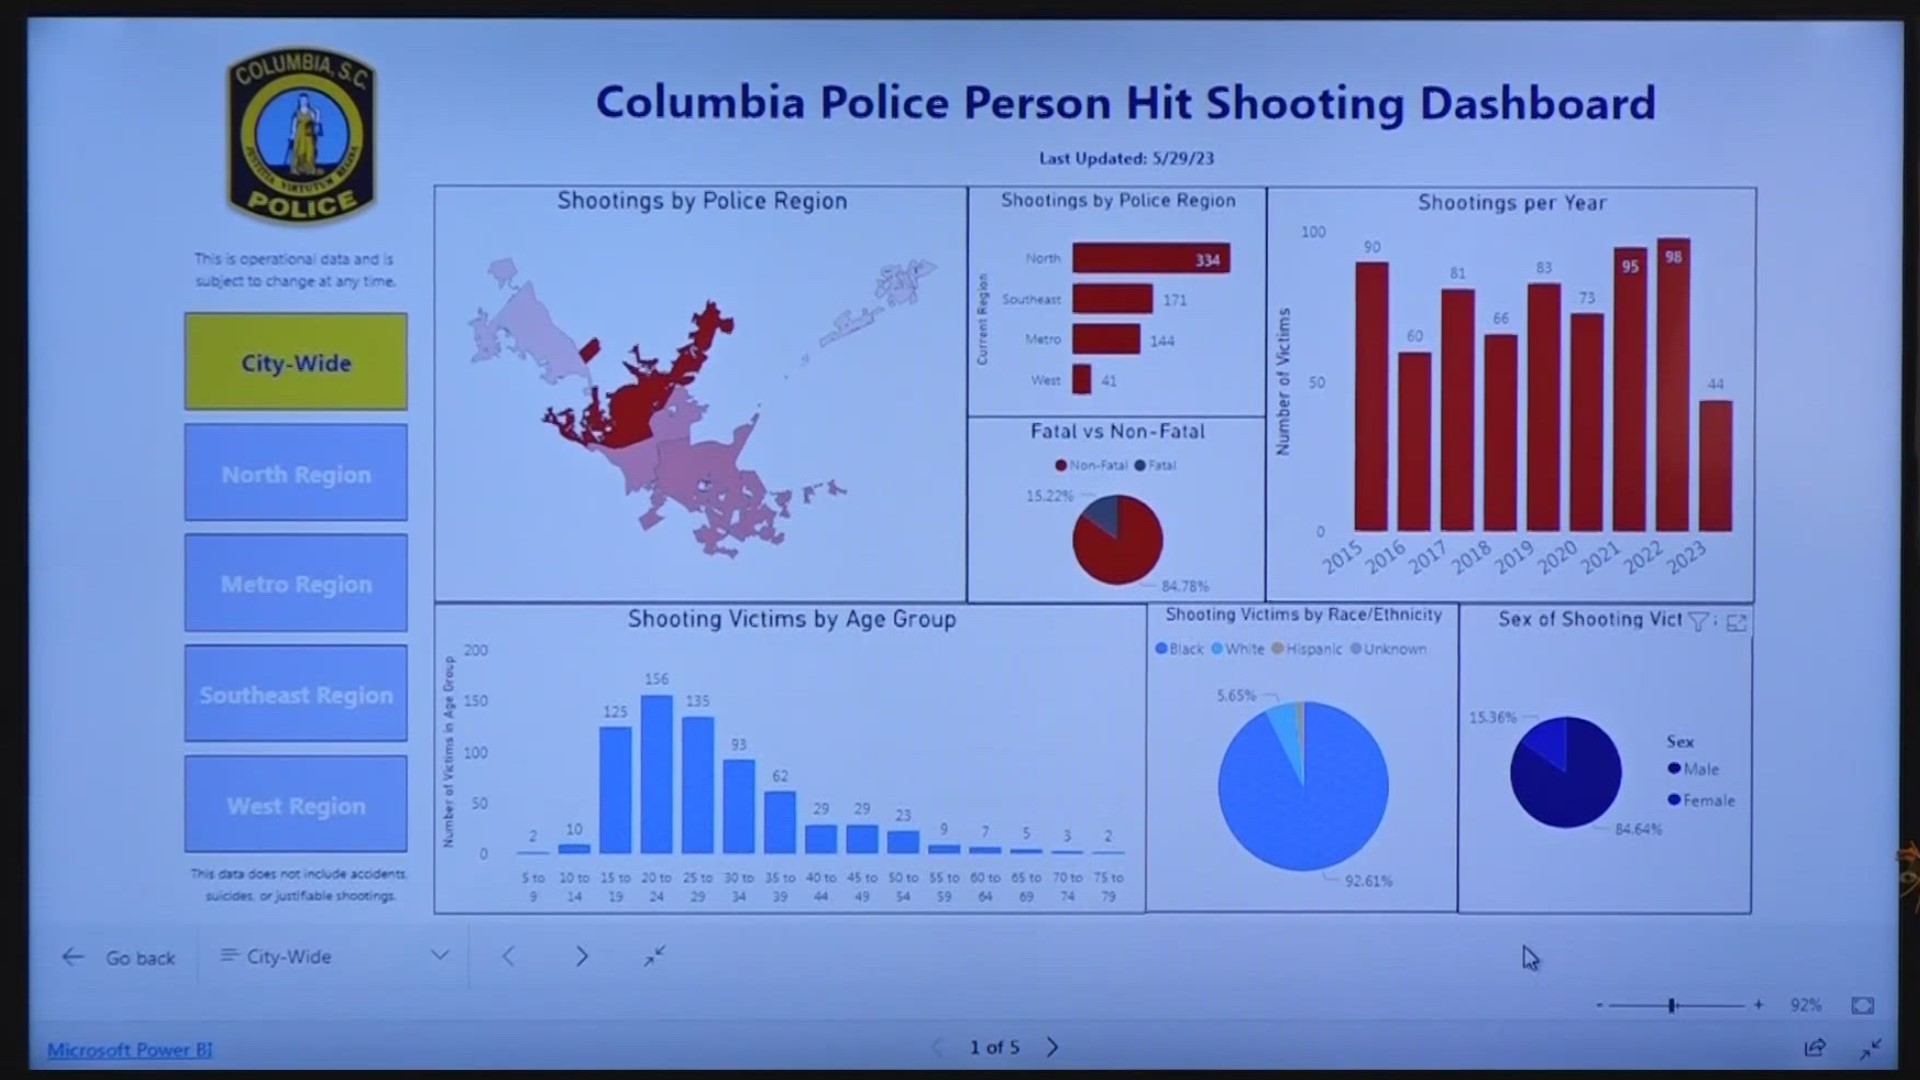 The Columbia Police Department says the dashboard is a tool to understand gun violence statistics in the city.